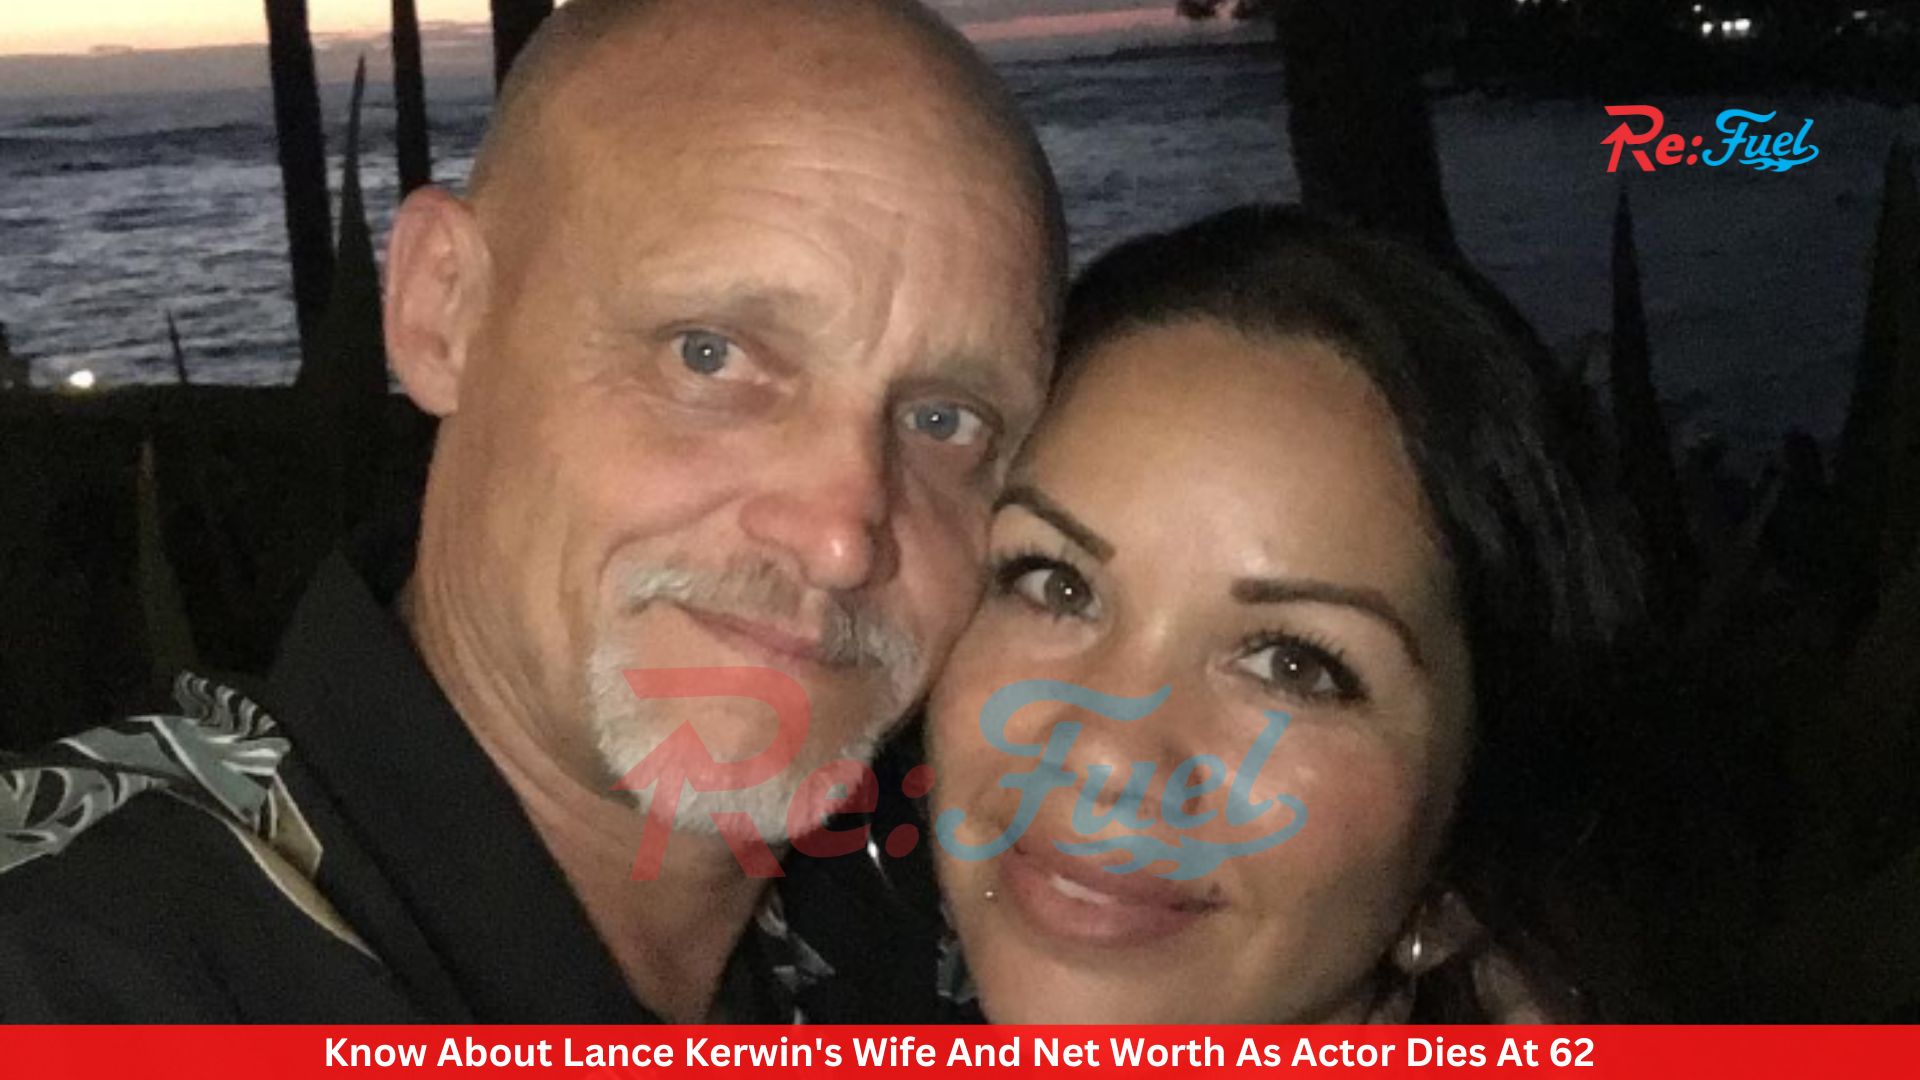 Know About Lance Kerwin's Wife And Net Worth As Actor Dies At 62